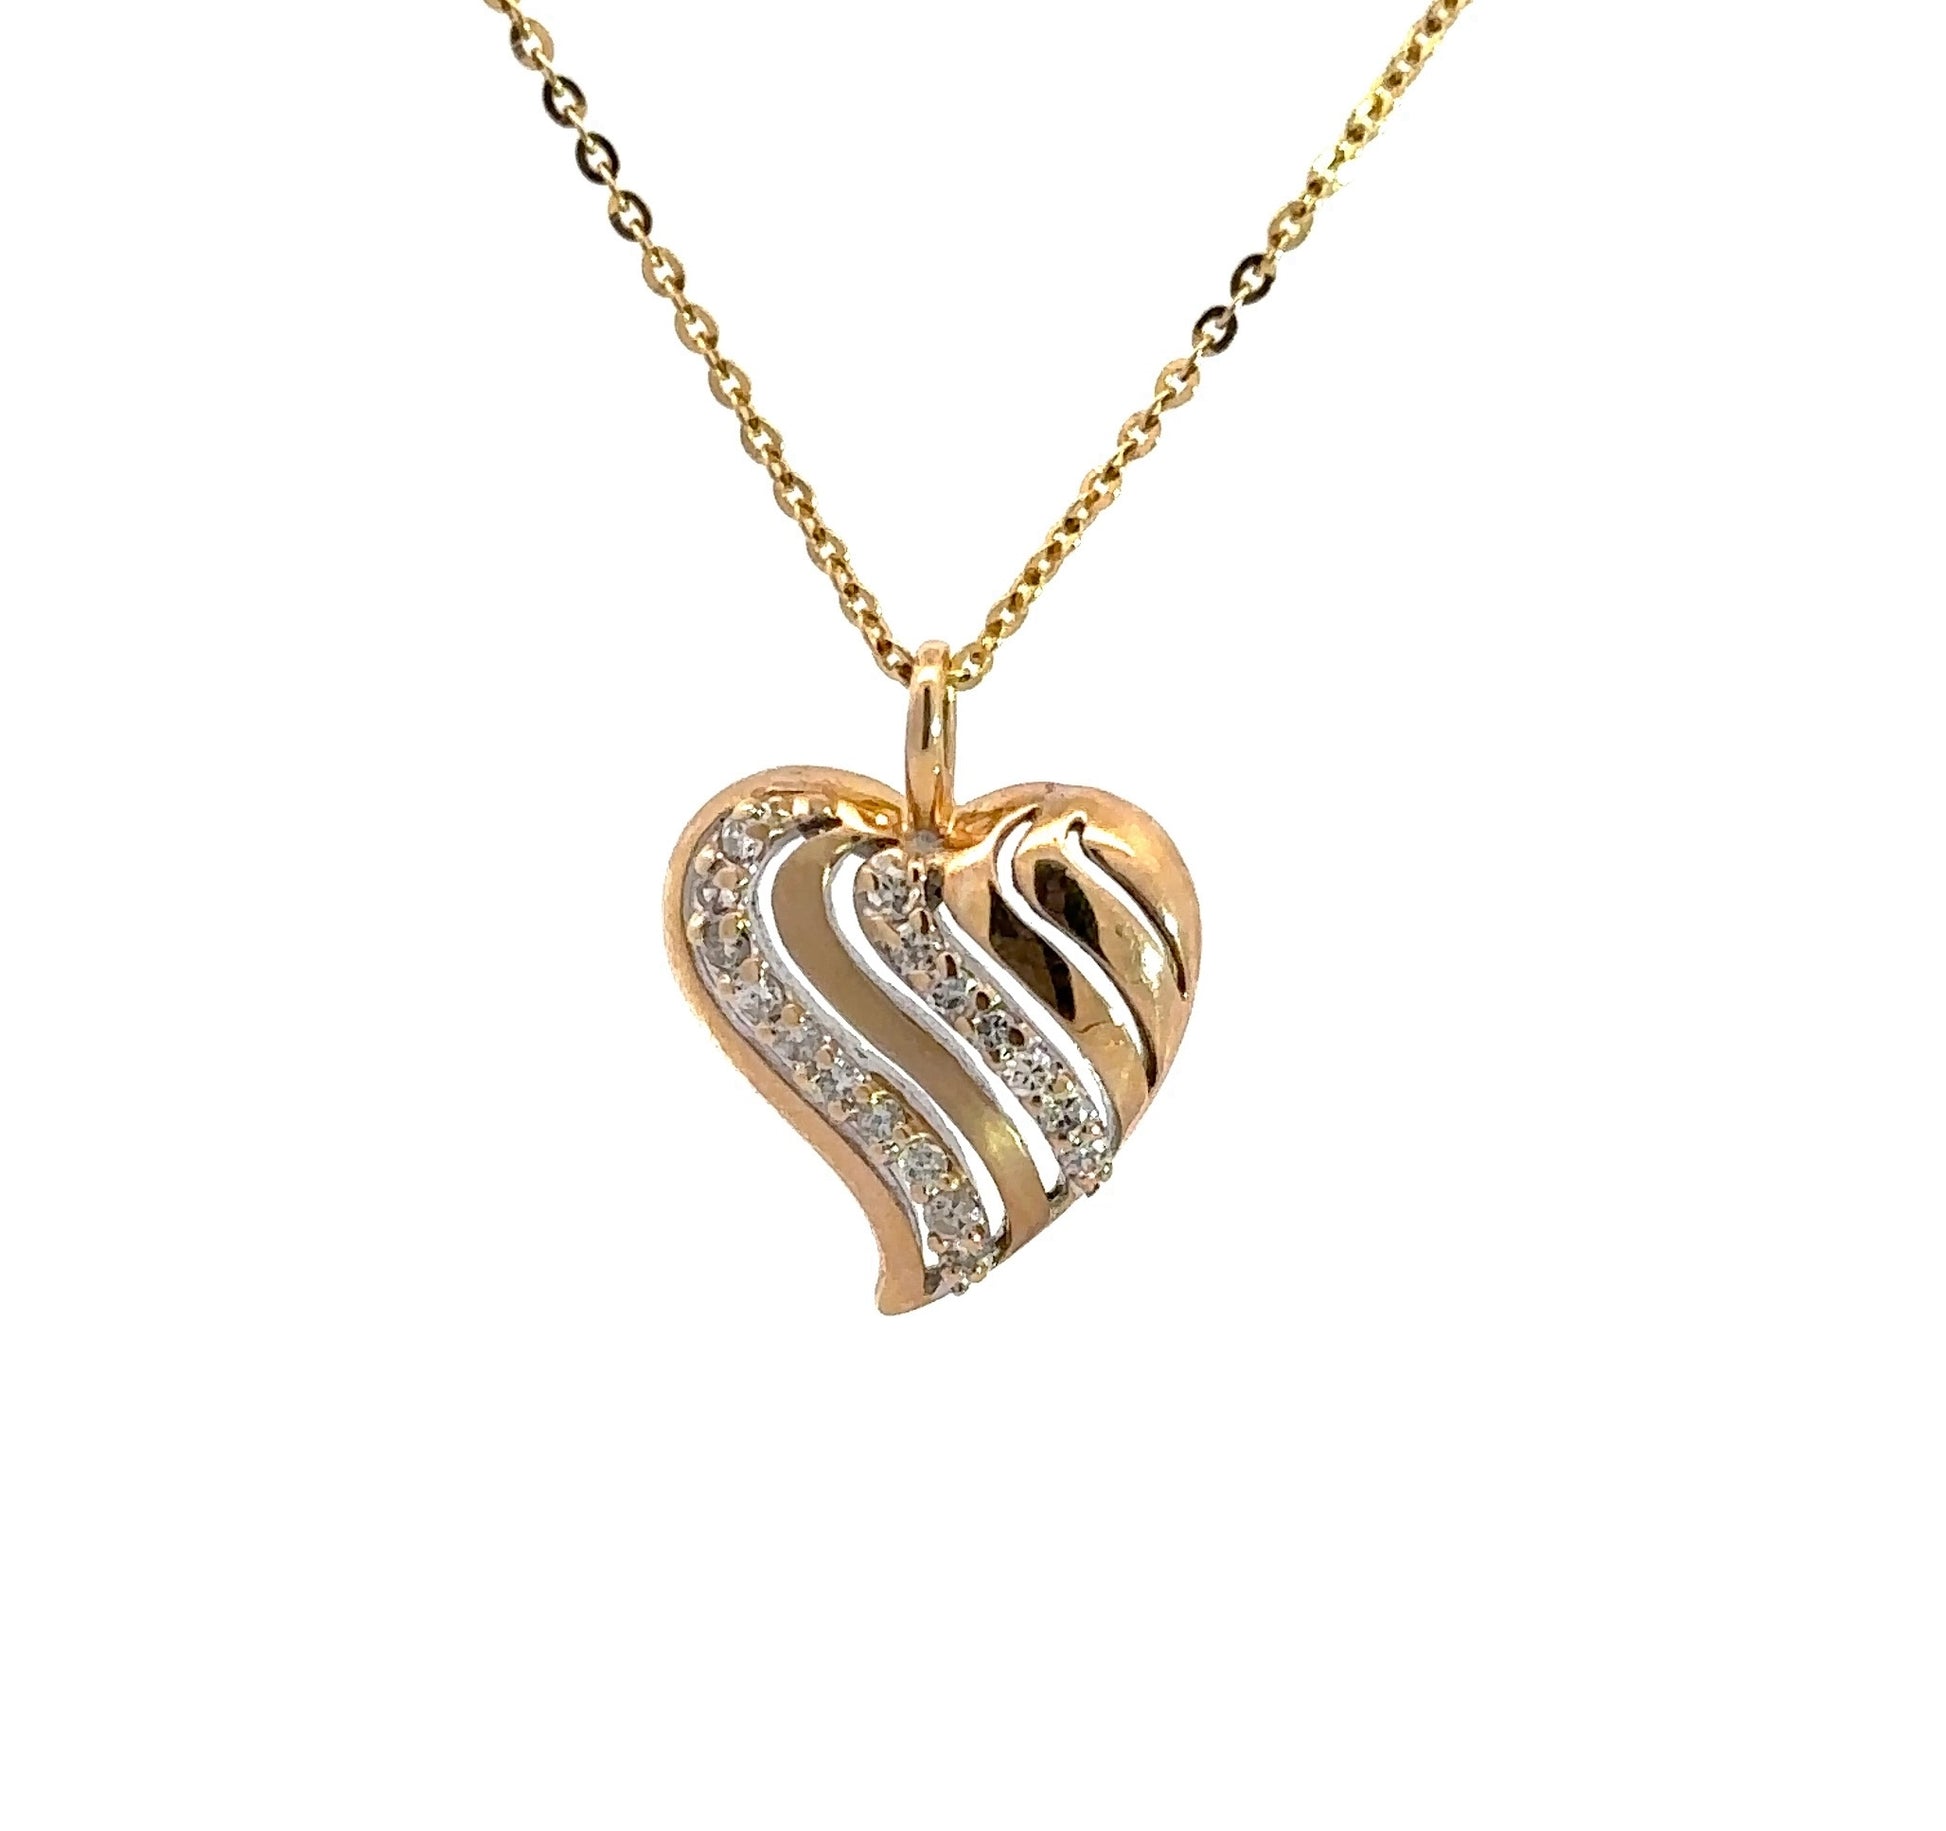 diamond heart necklace with 2 rows of diamonds and scratches on the gold heart